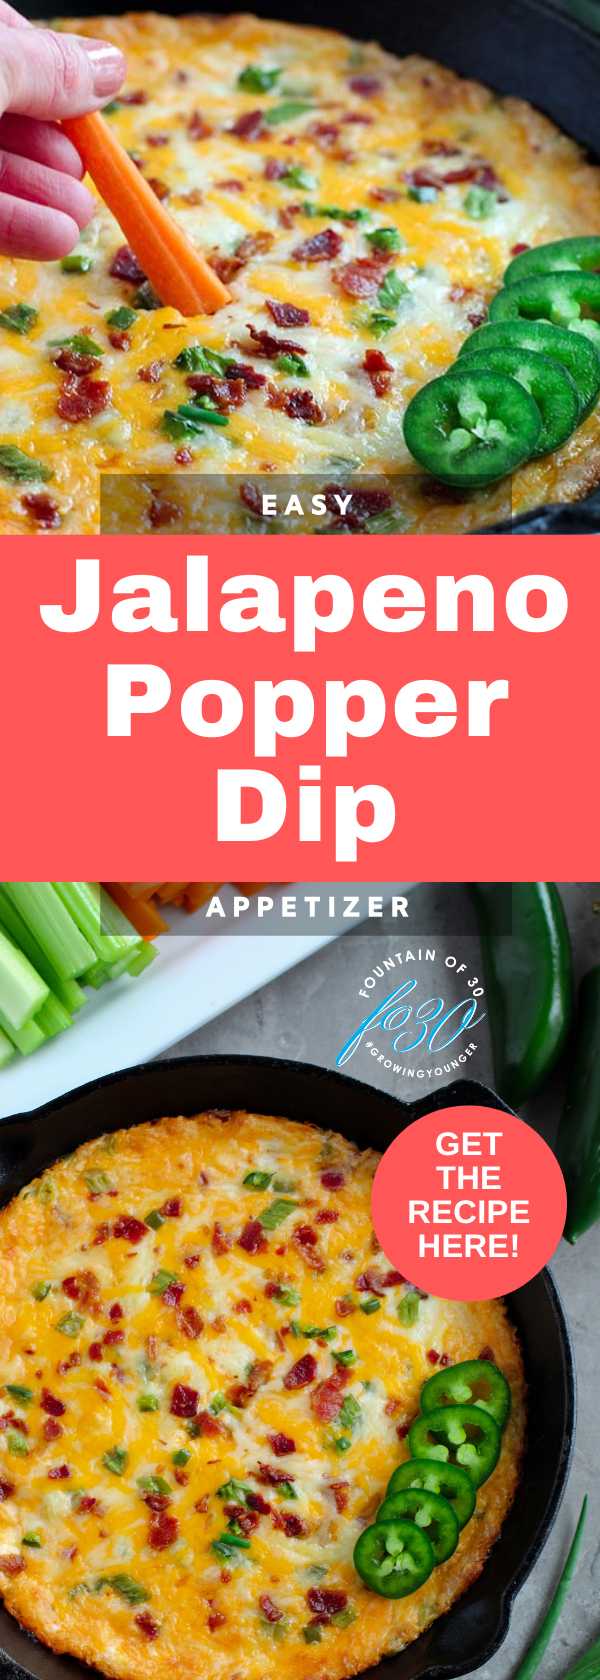 easy appetizers game day snack jalapeno popper dip recipe fountainof30